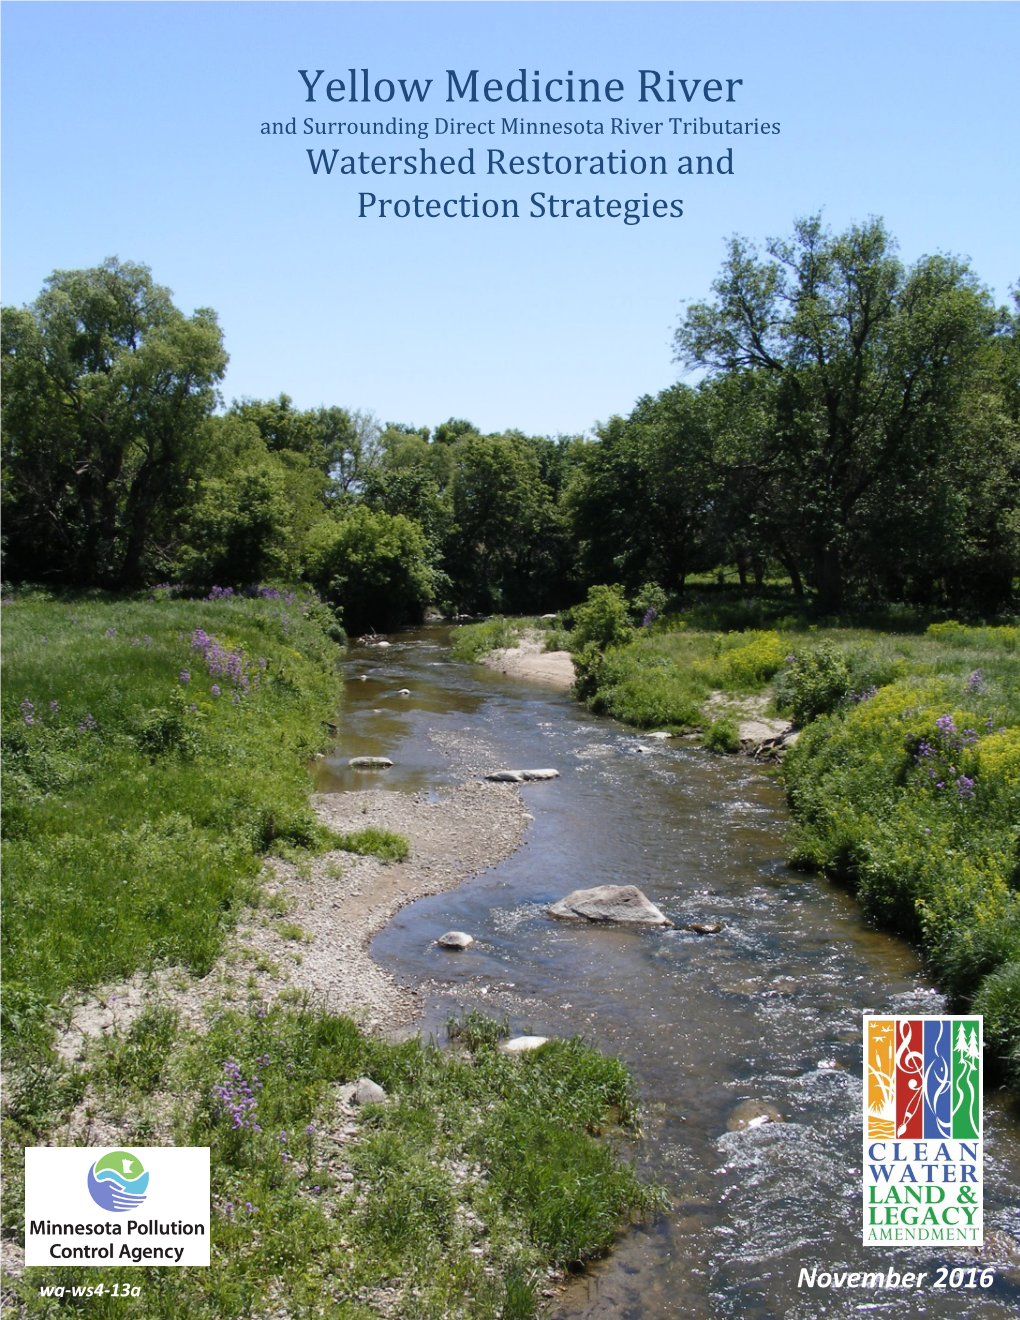 Yellow Medicine Watershed Restoration and Protection Strategies